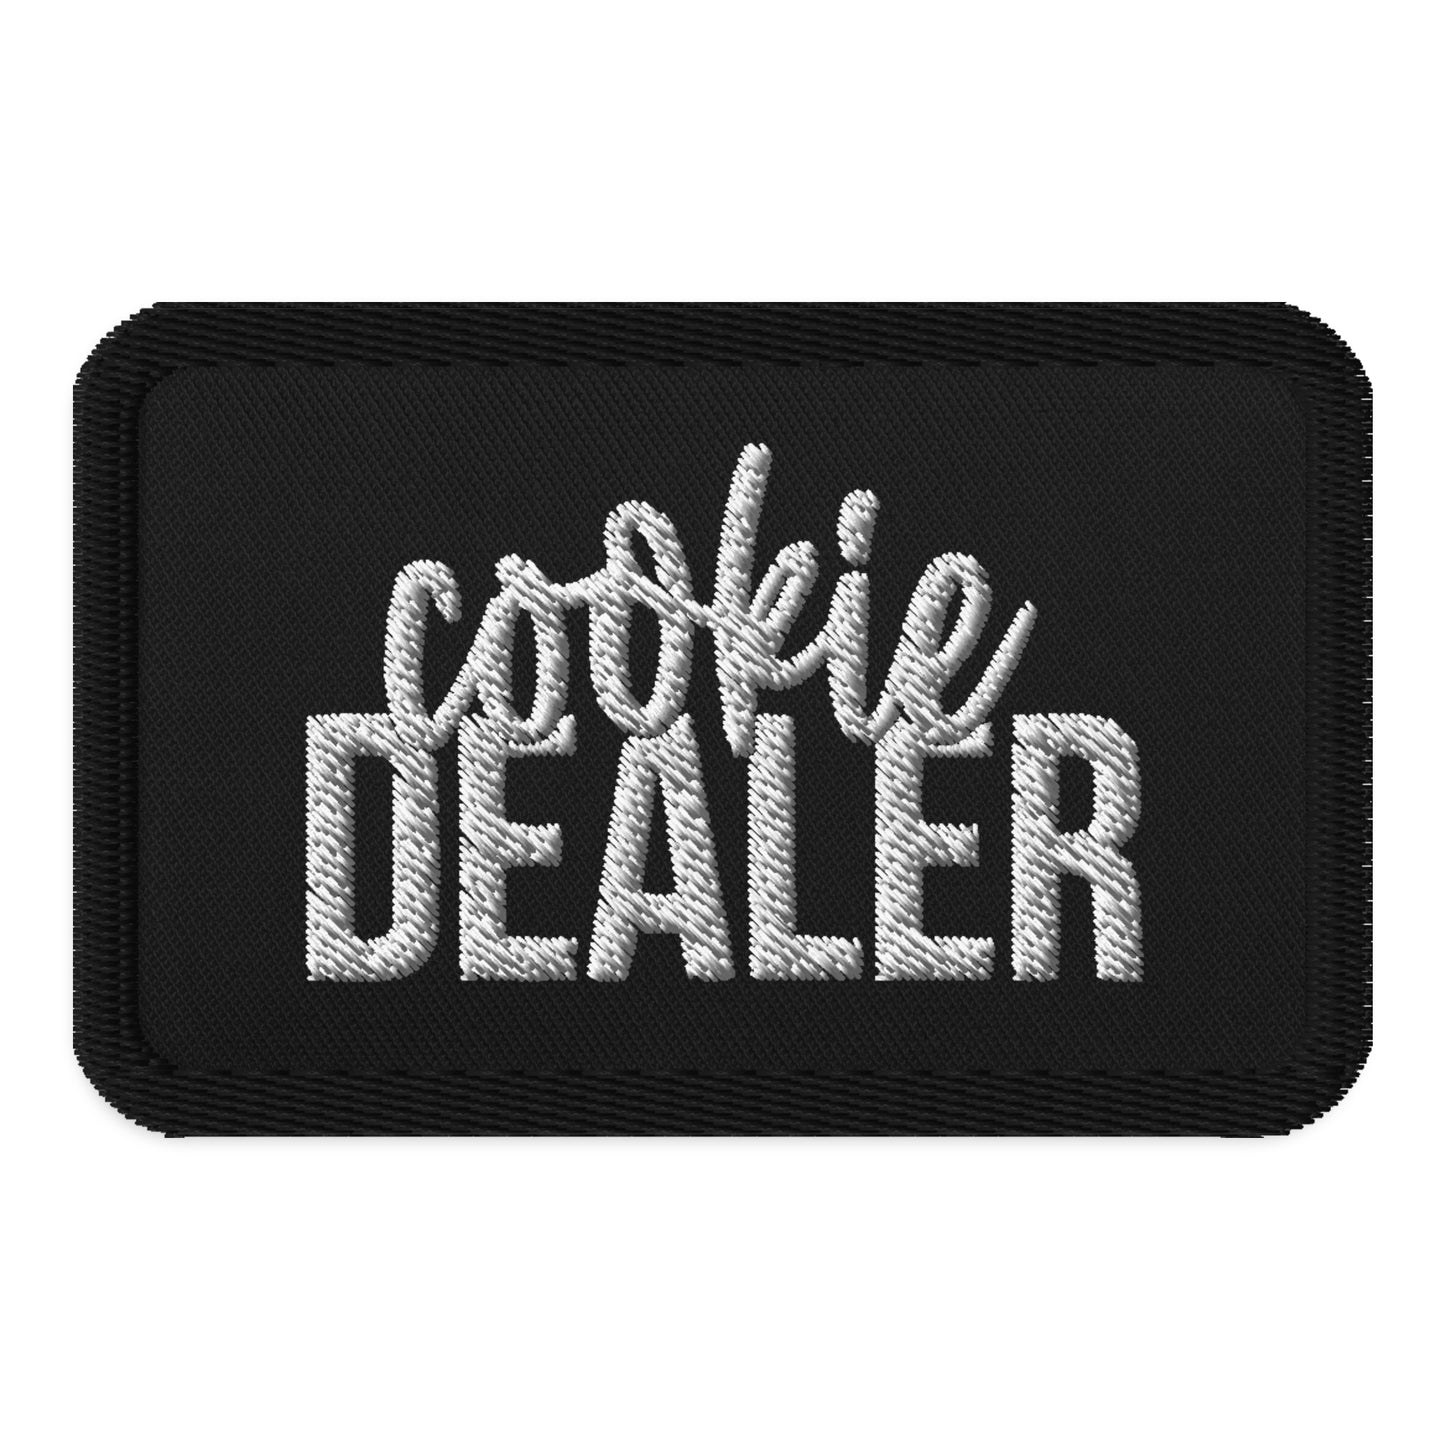 Cookie Dealer Embroidered Patch